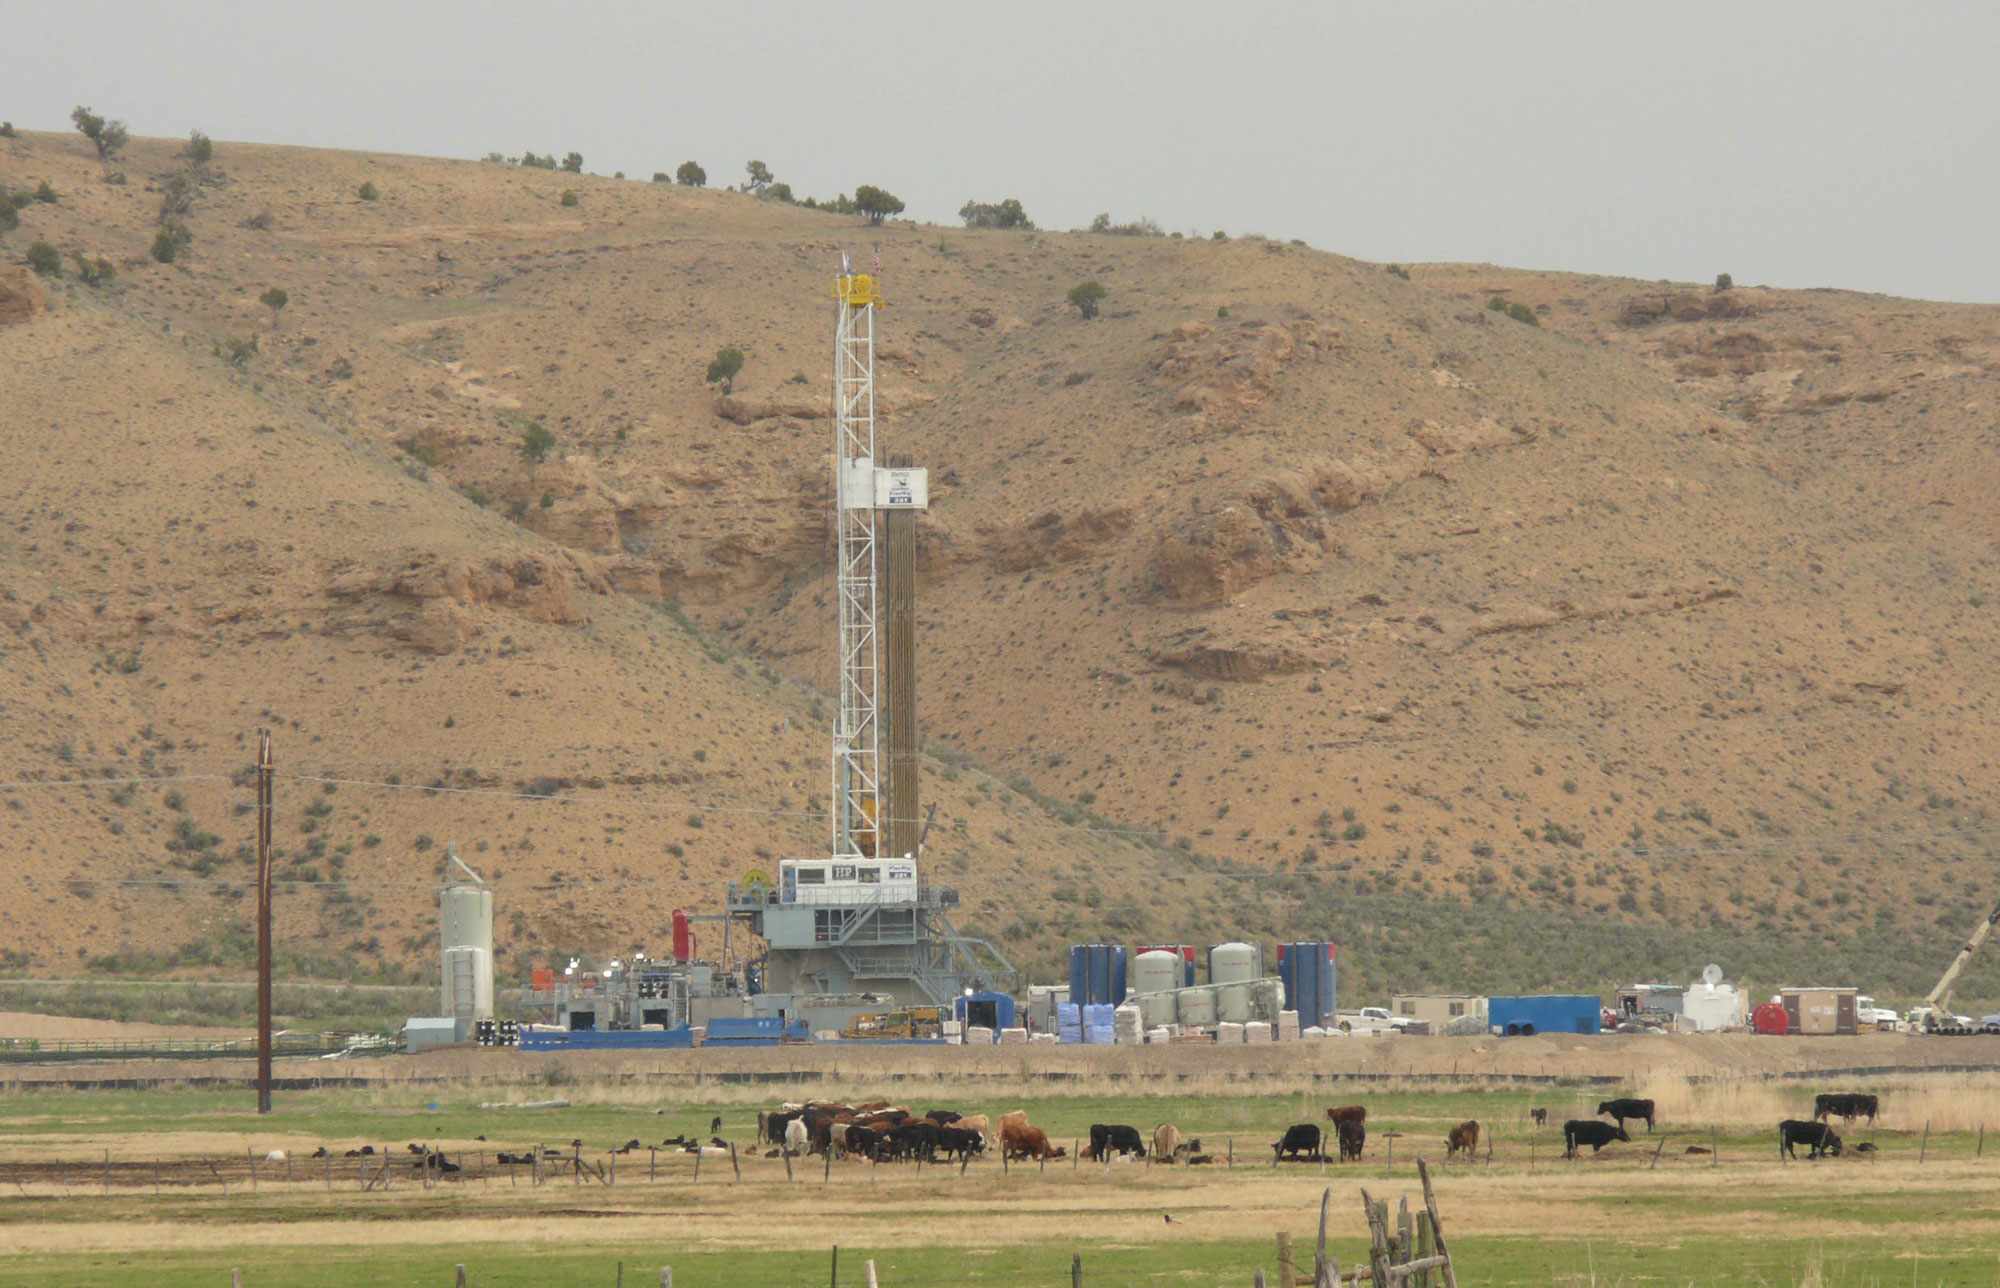 Photo of a drill rig in Colorado. The rig is a large white tower built out of bars of metal. Tanks and other structures are arrayed around it. Near to the viewer, a herd of cows is grazing. In the background, a light brown hill with sparse vegetation rises.